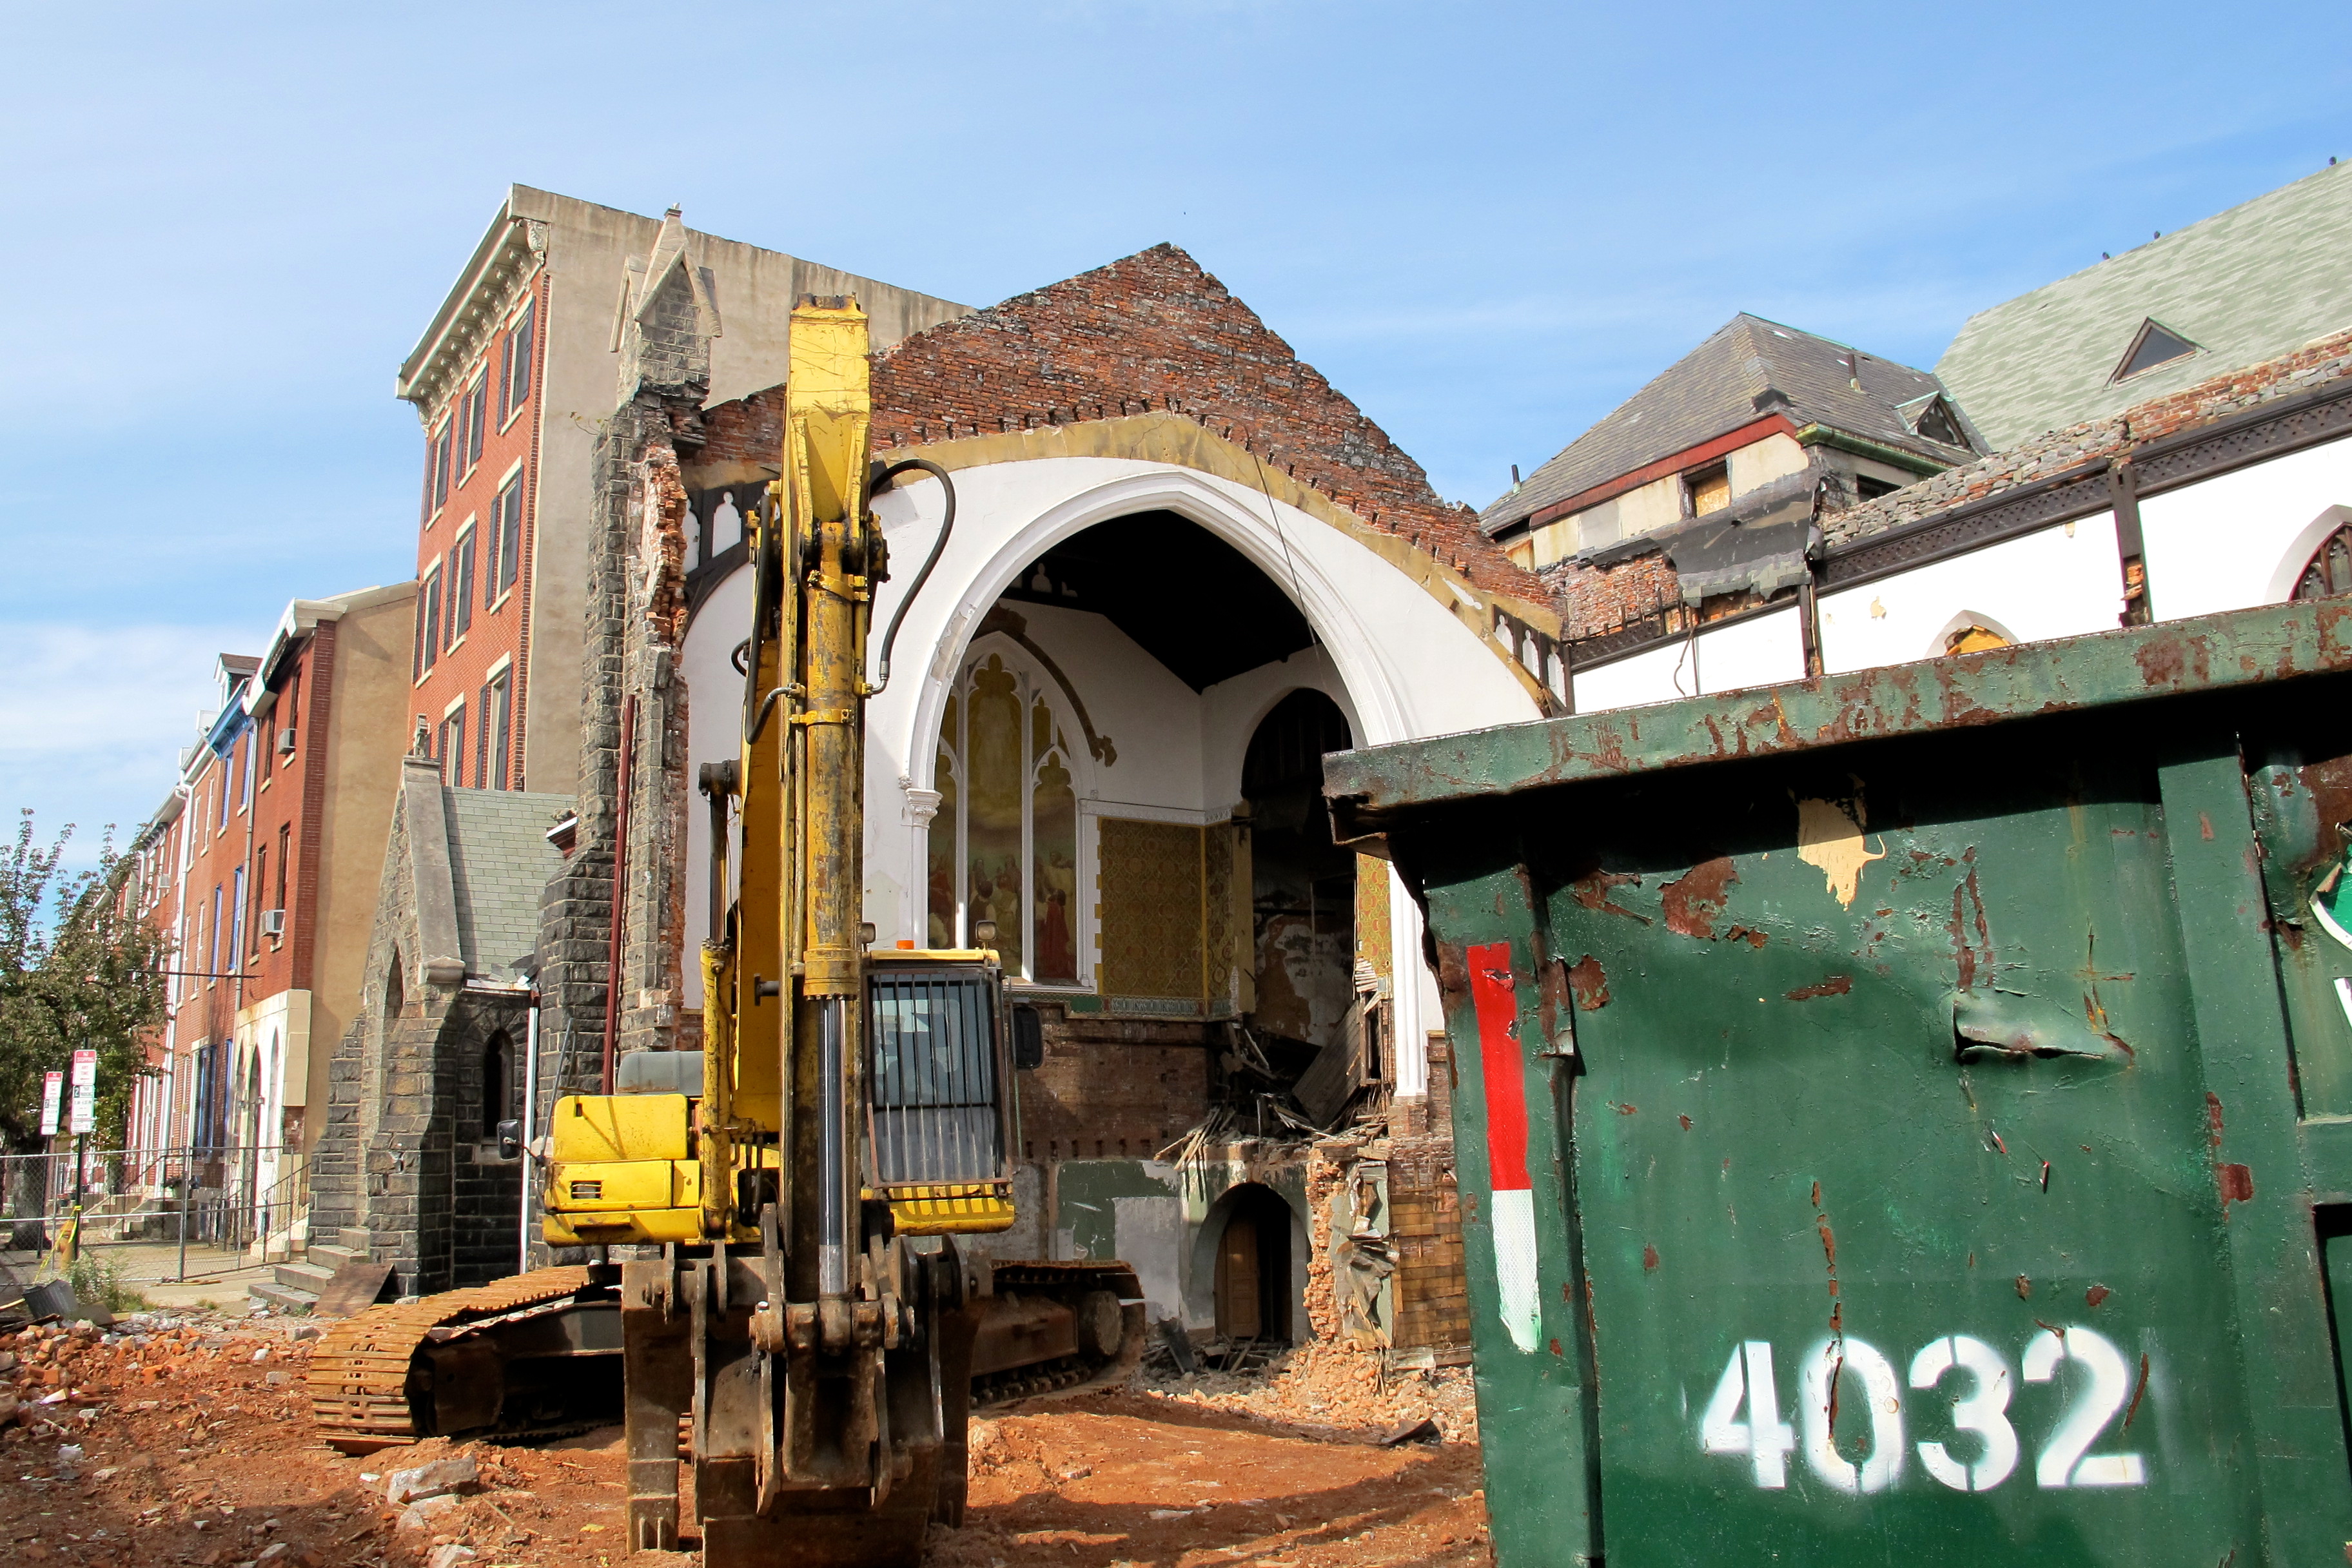 The Church of the Nativity was demolished in October, 2012